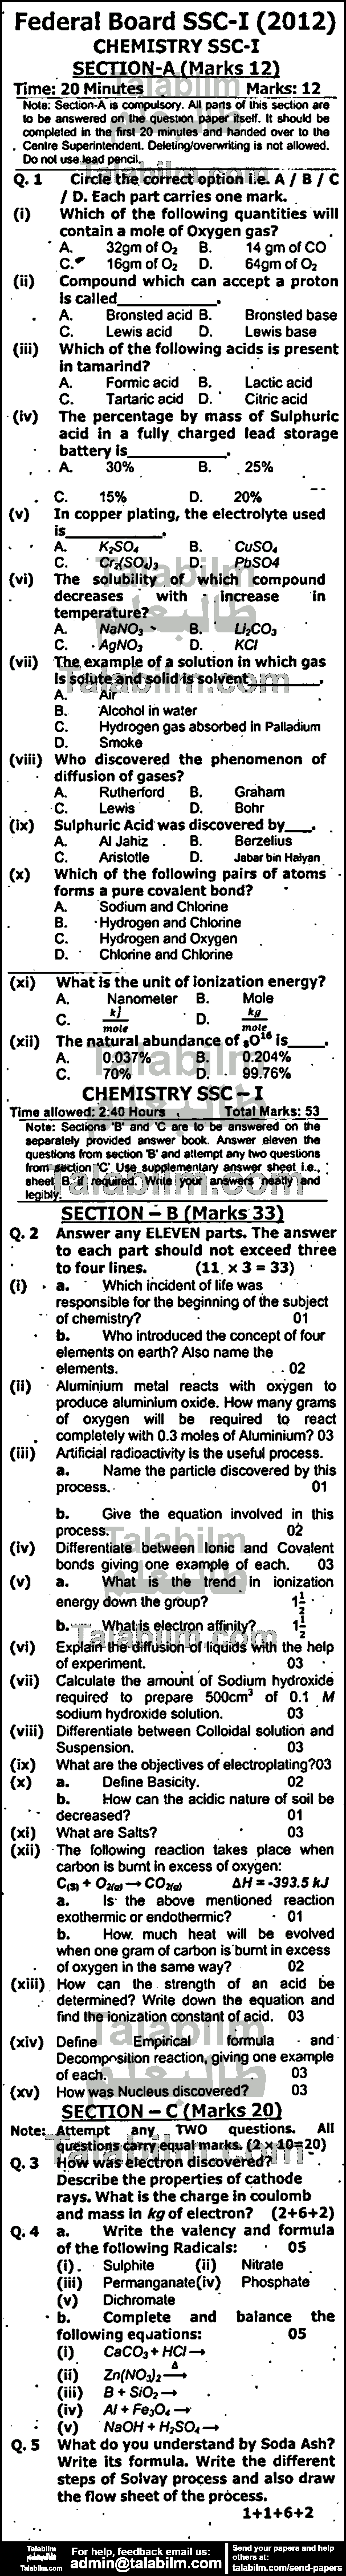 Chemistry 0 past paper for English Medium 2012 Group-I